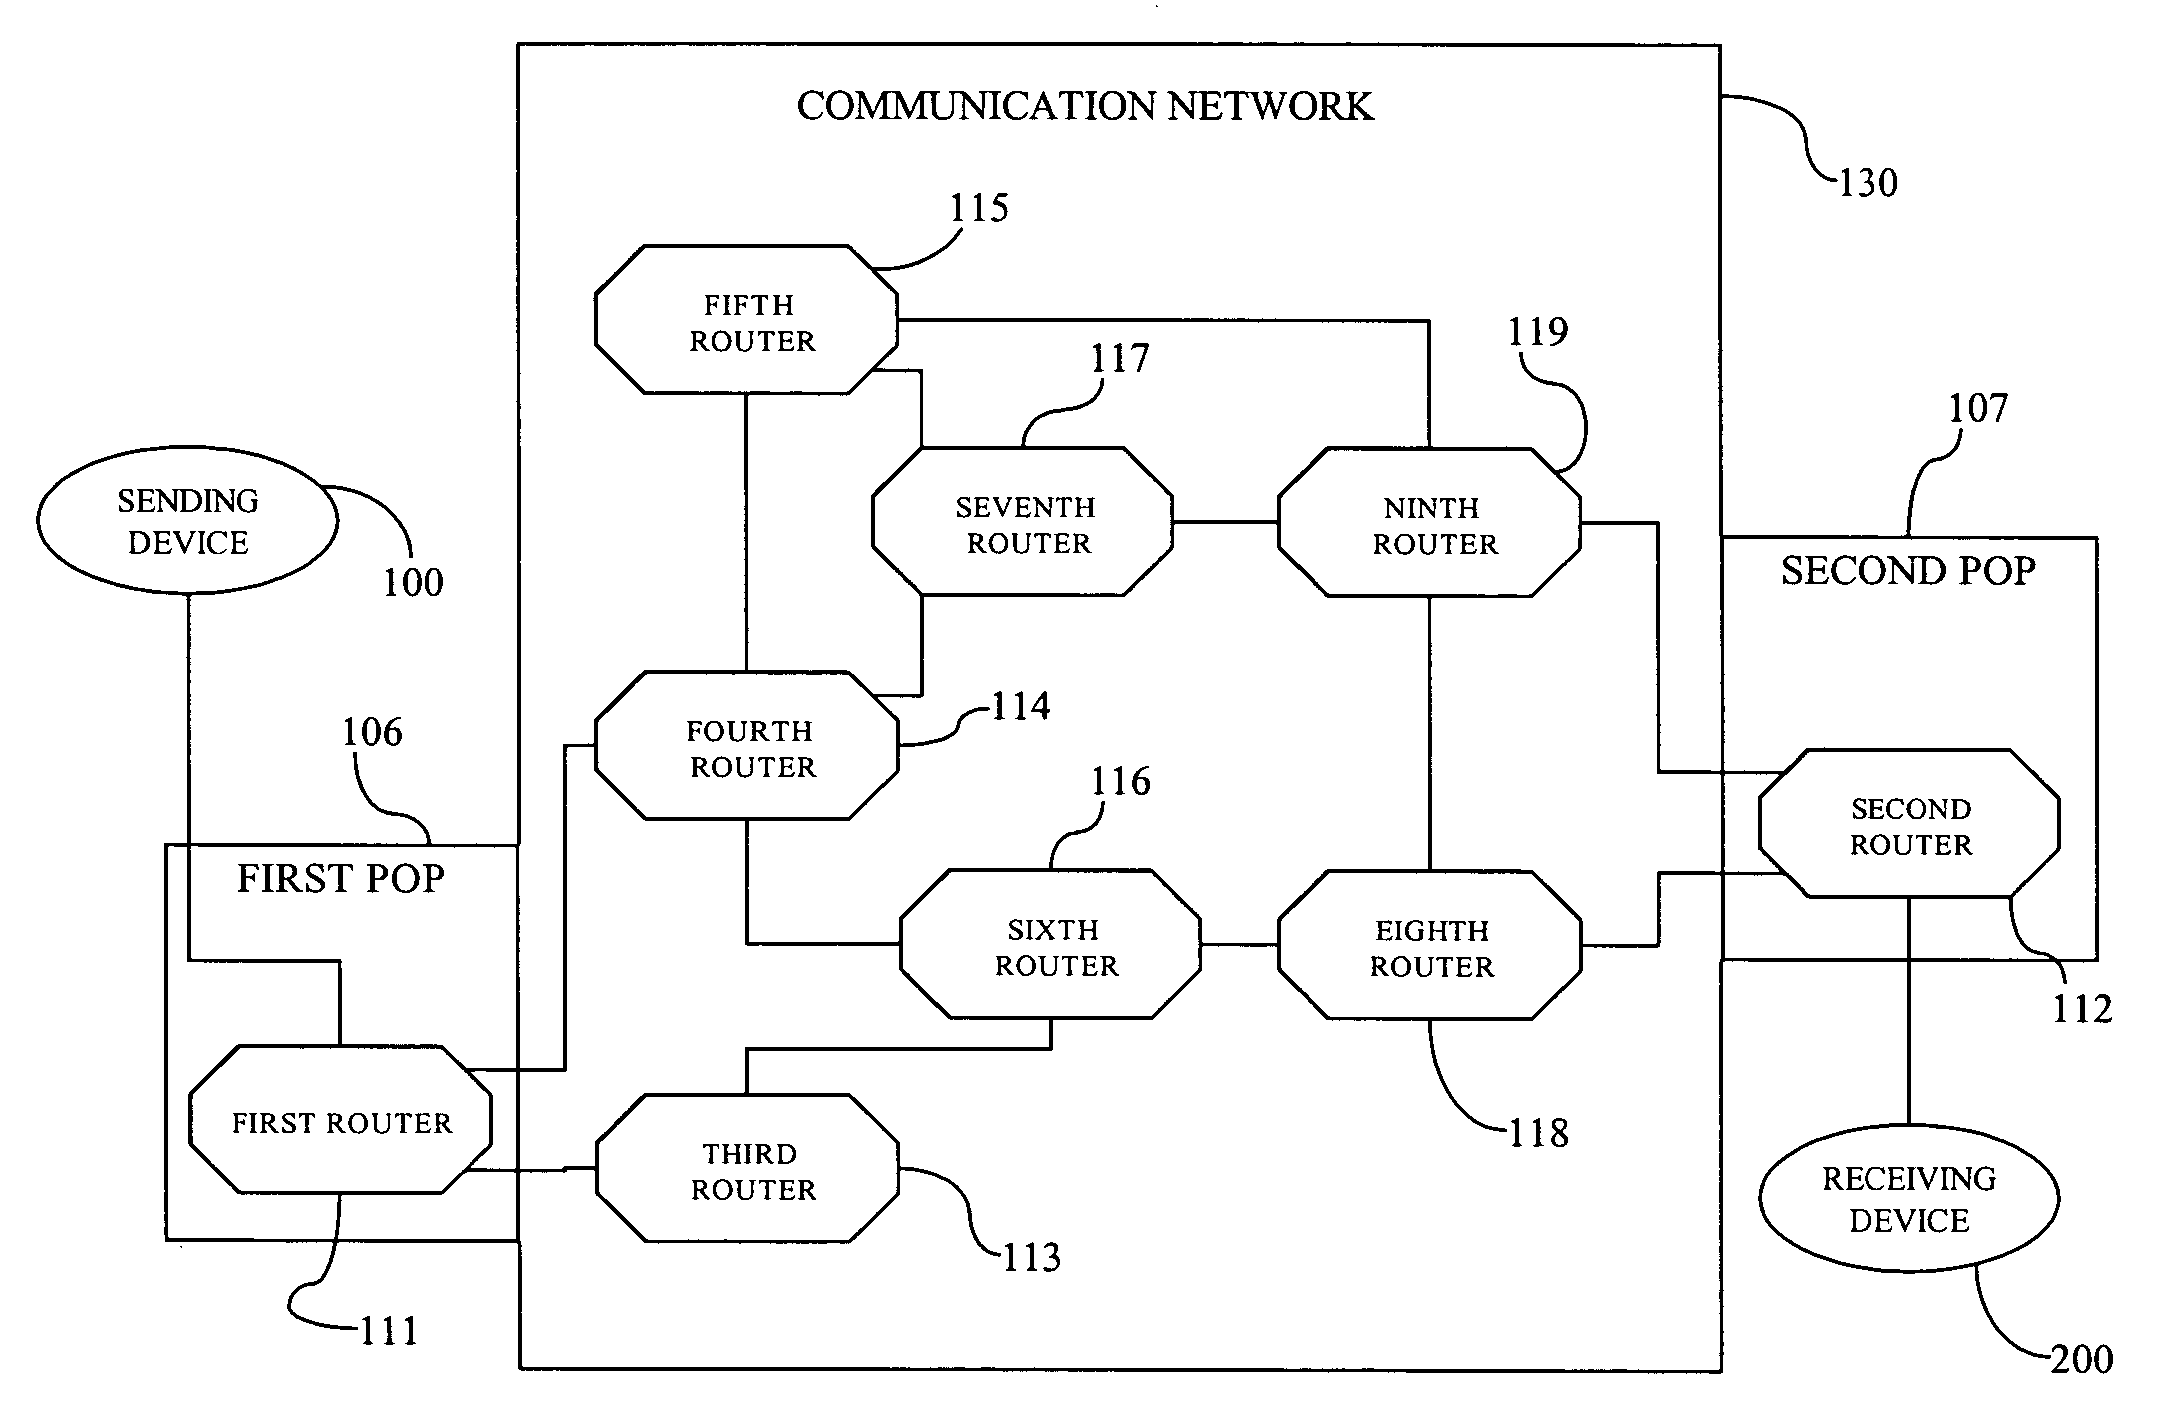 Defining a static path through a communications network to provide wiretap law compliance